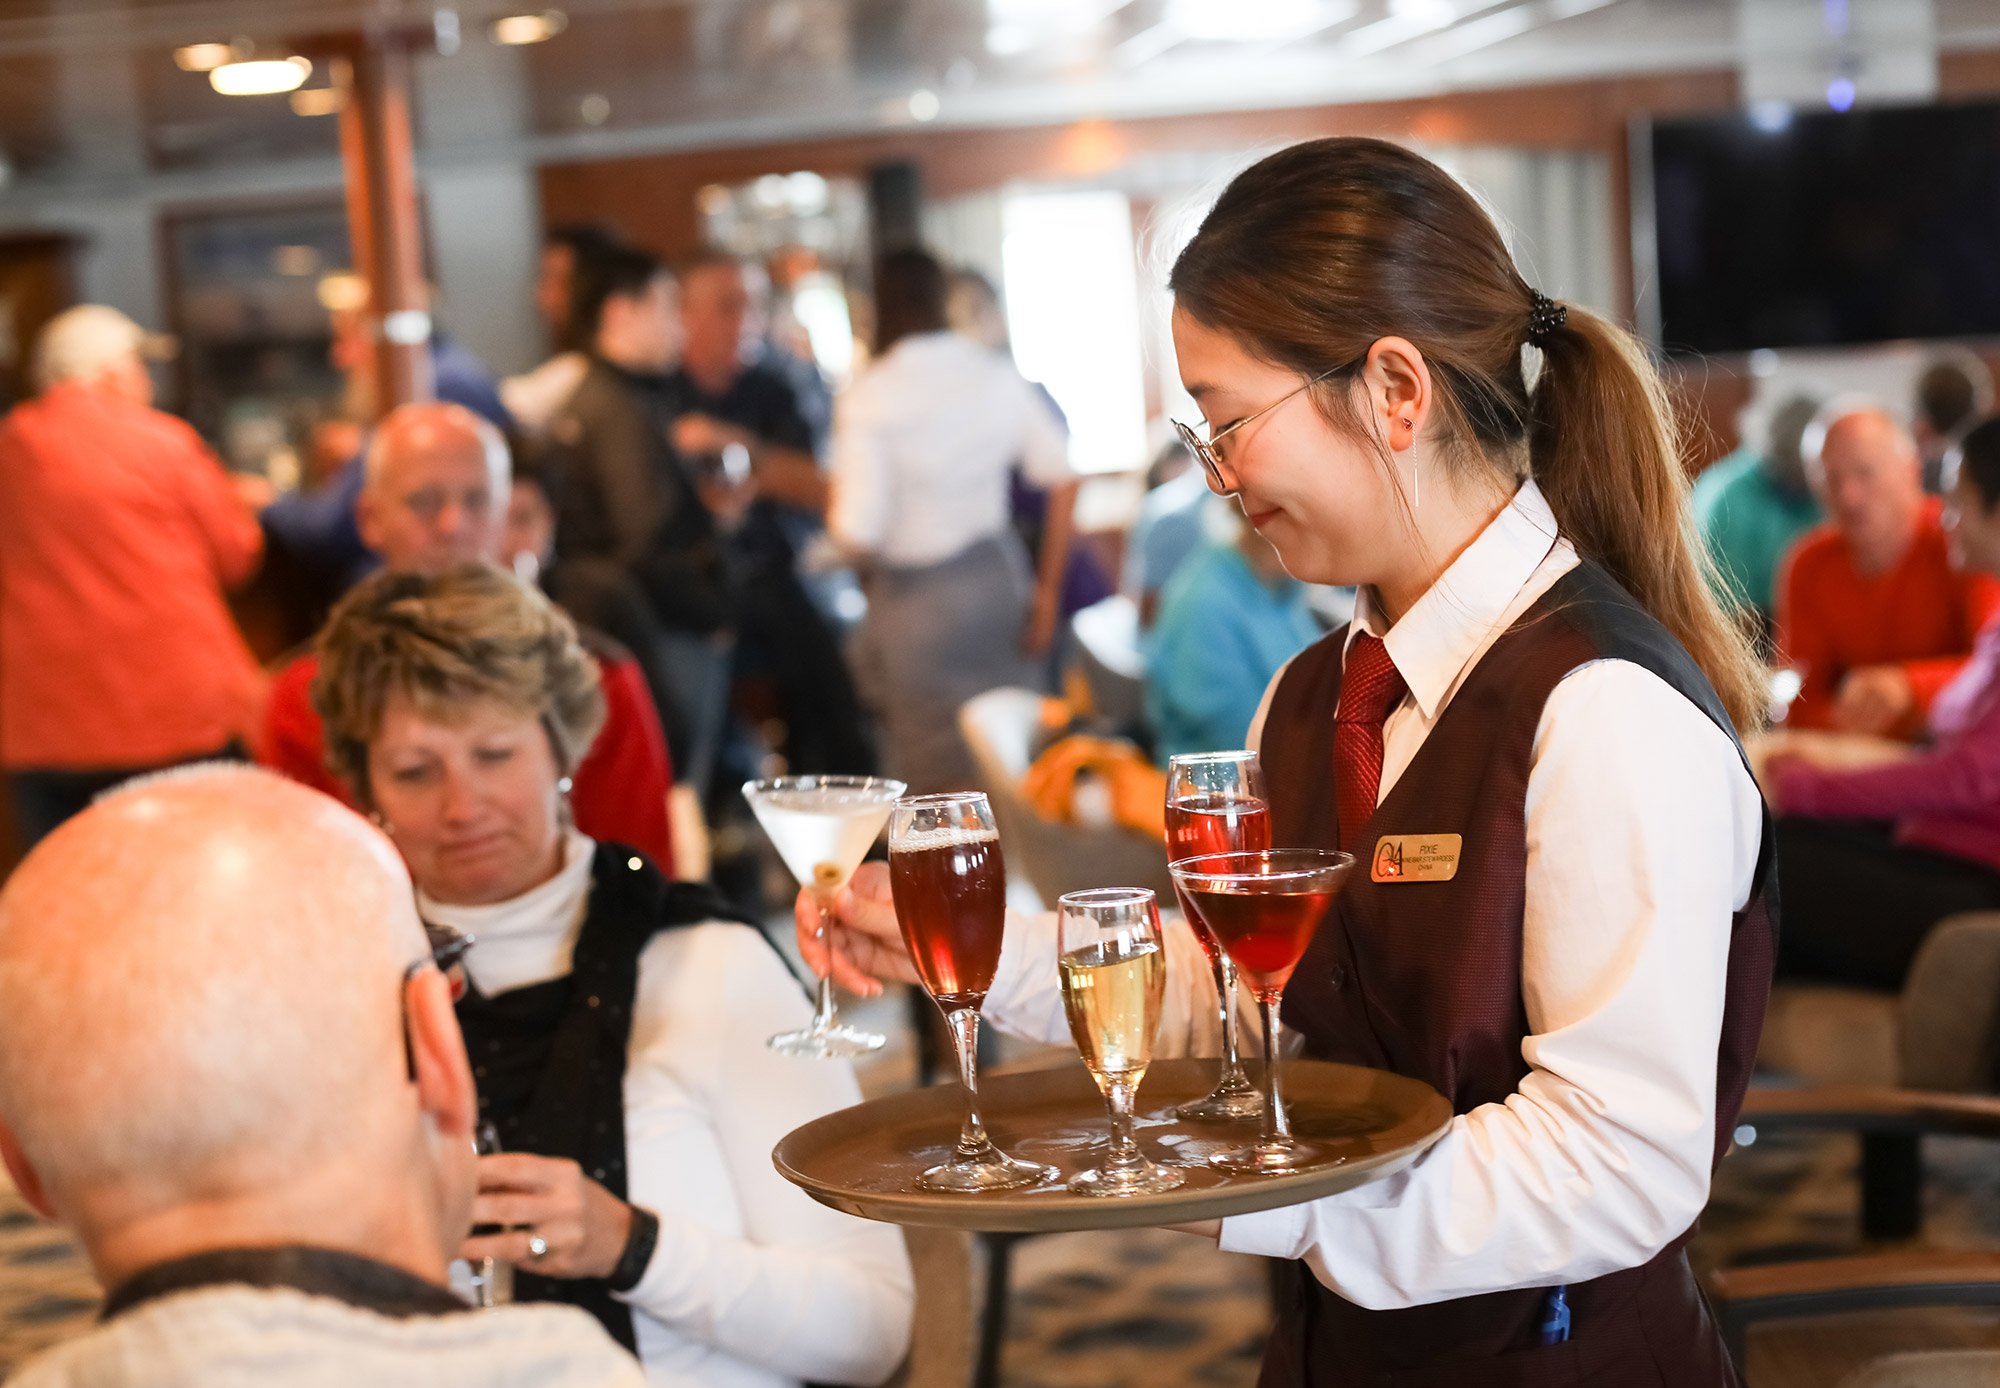 Server with tray of cocktails and alcoholic drinks standing beside seated man and woman on polar expedition cruise ship.